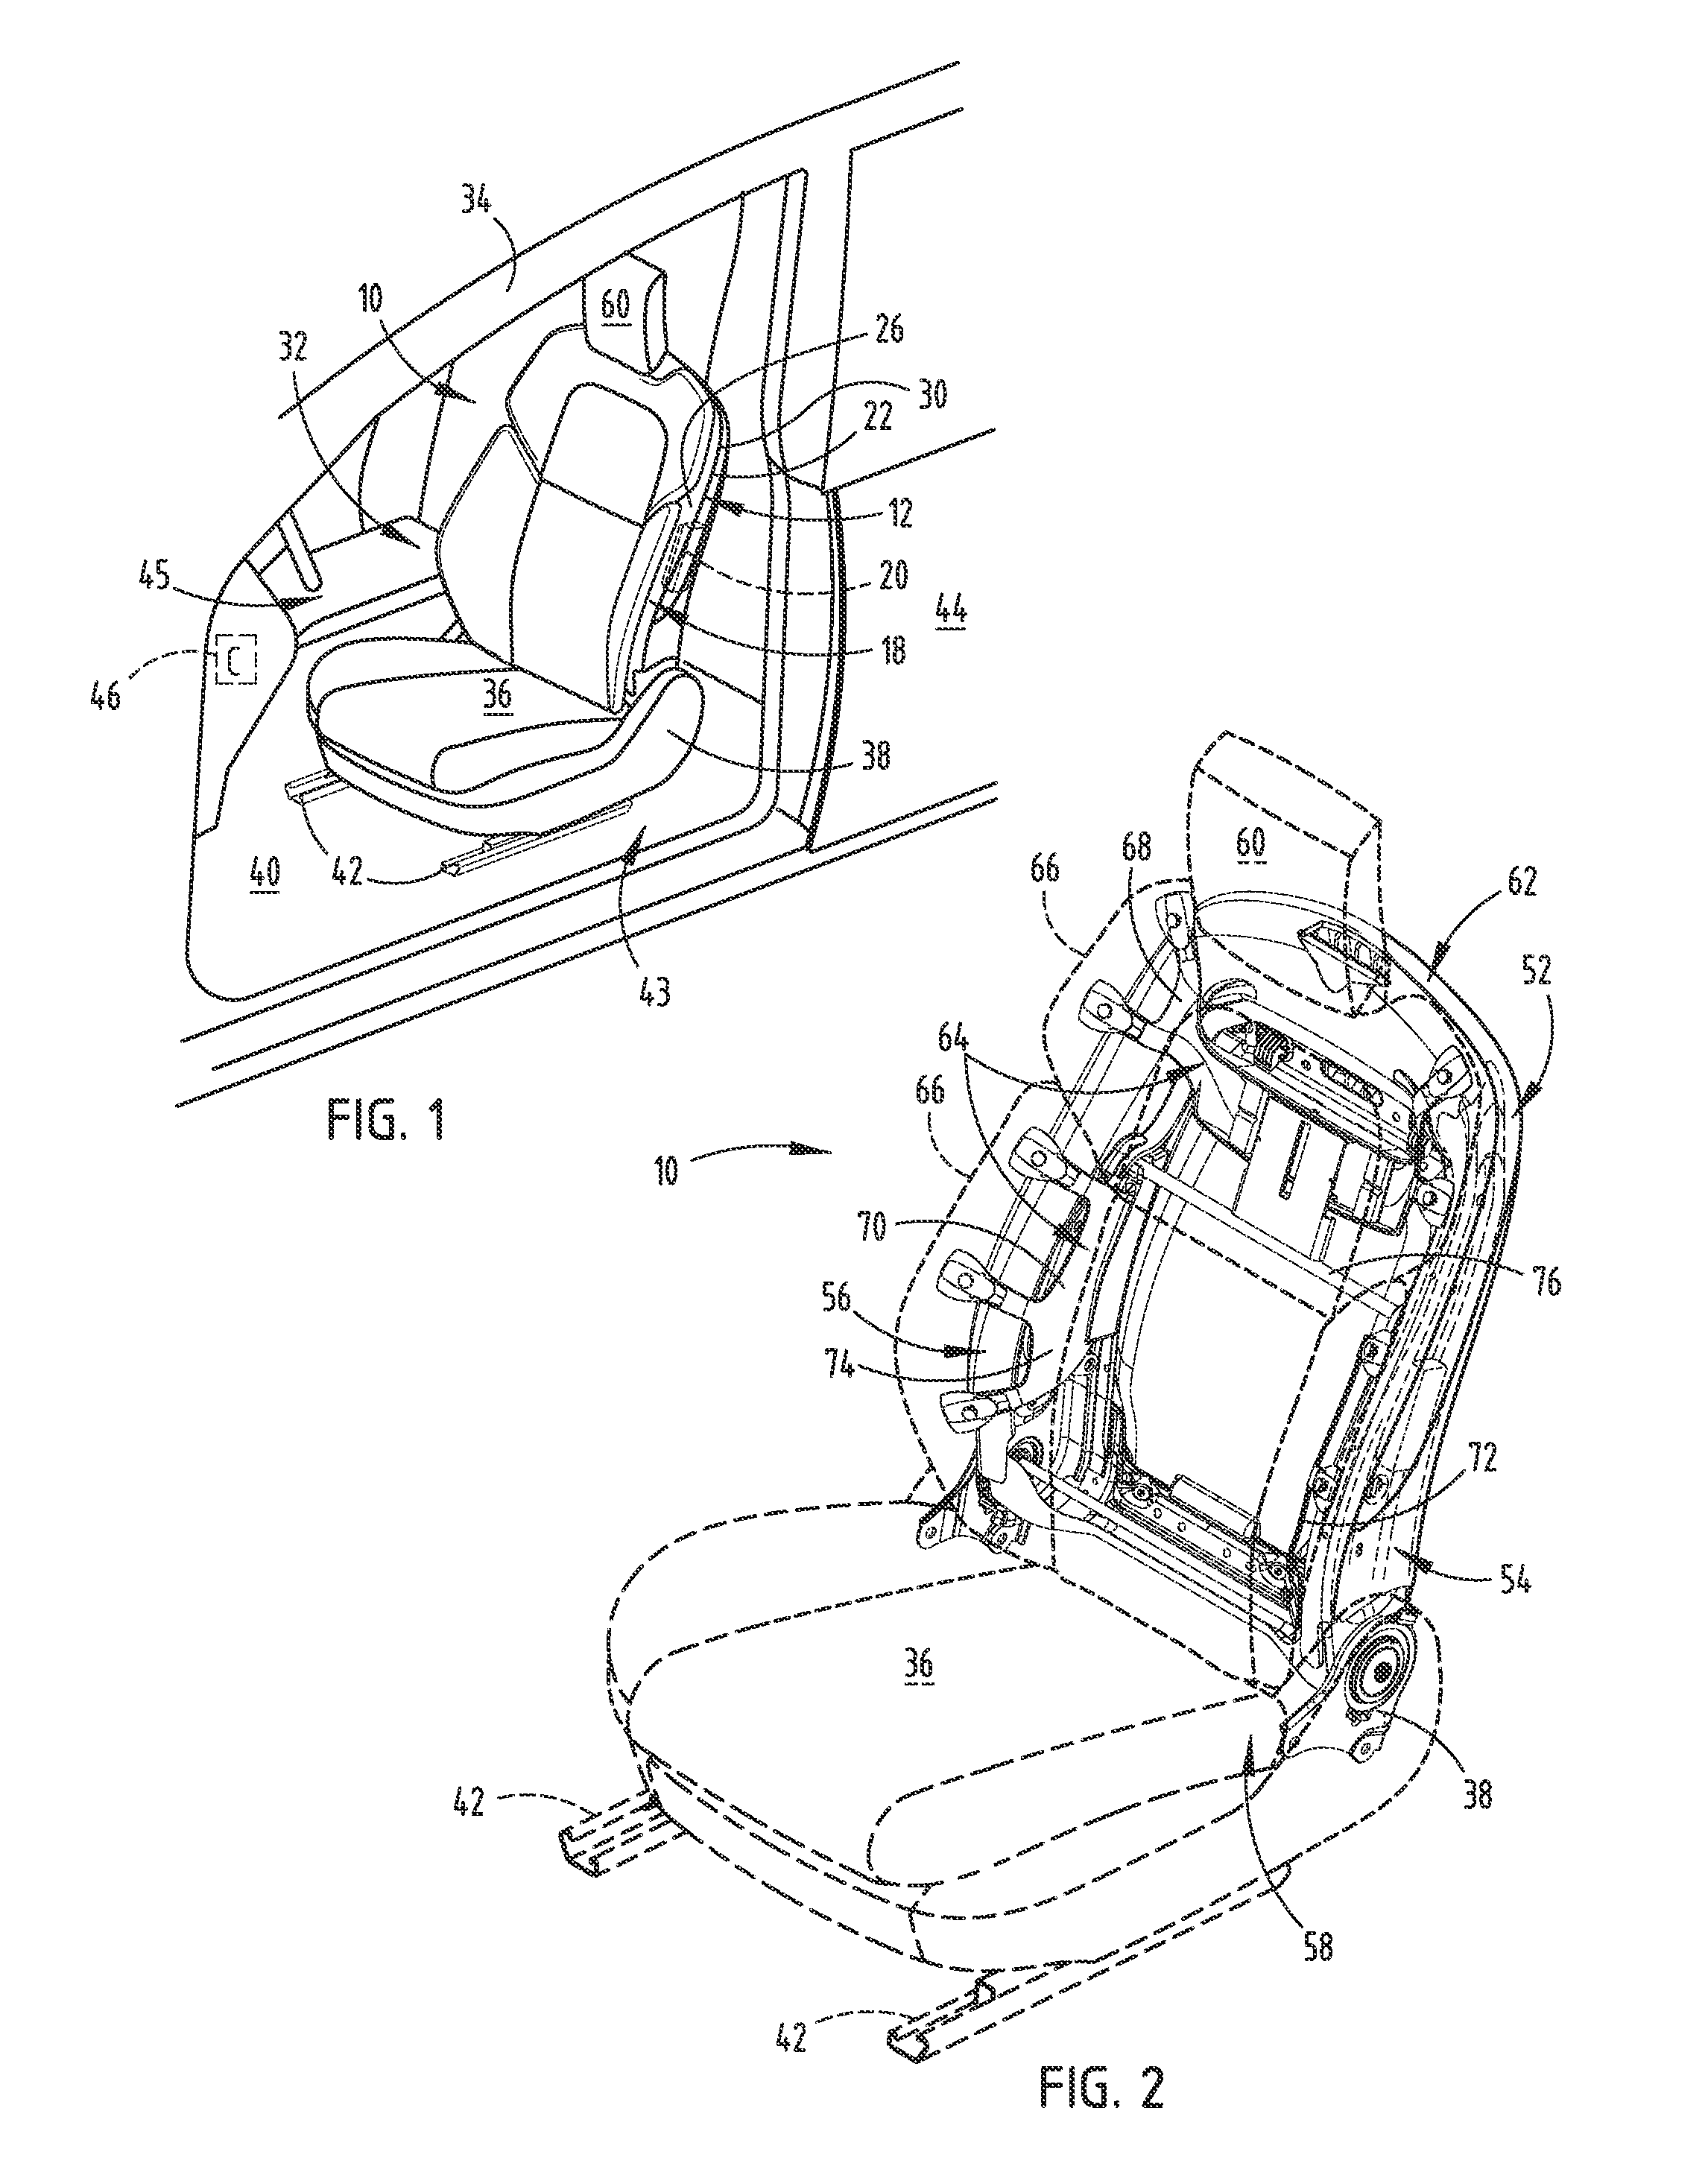 Vehicle seatback with side airbag deployment